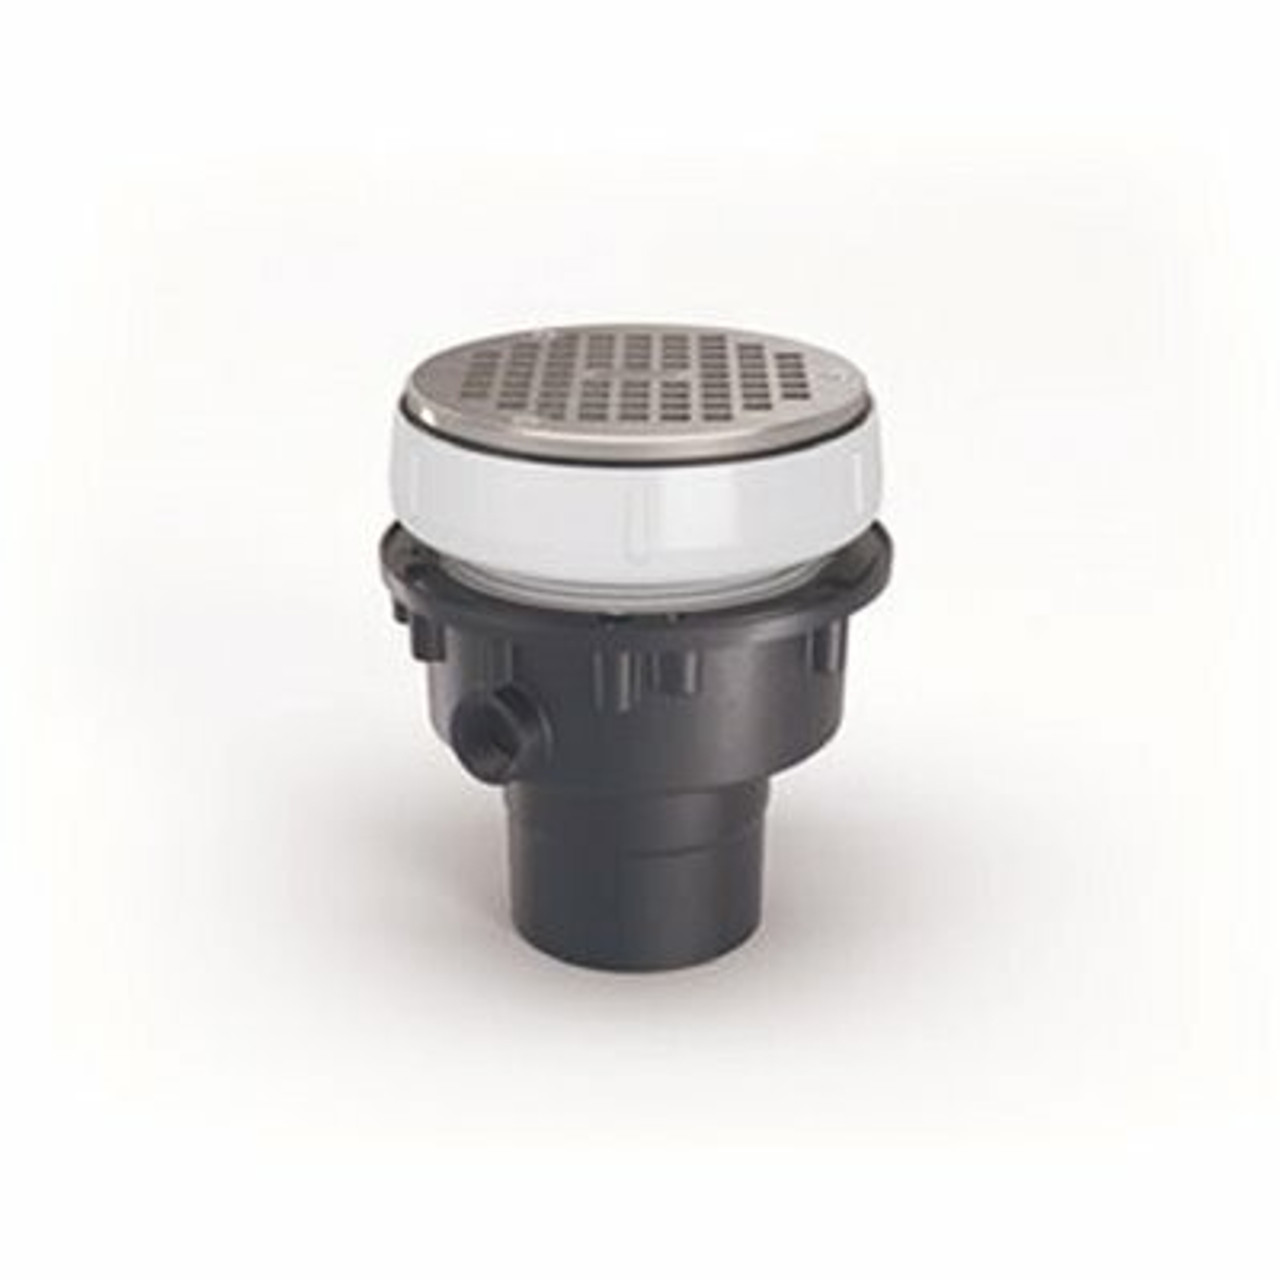 Zurn Ez Pvc Slab On Grade Drain With 6 In. Nickel Bronze Strainer And 3 In. X 4 In. Outlet - 306302358